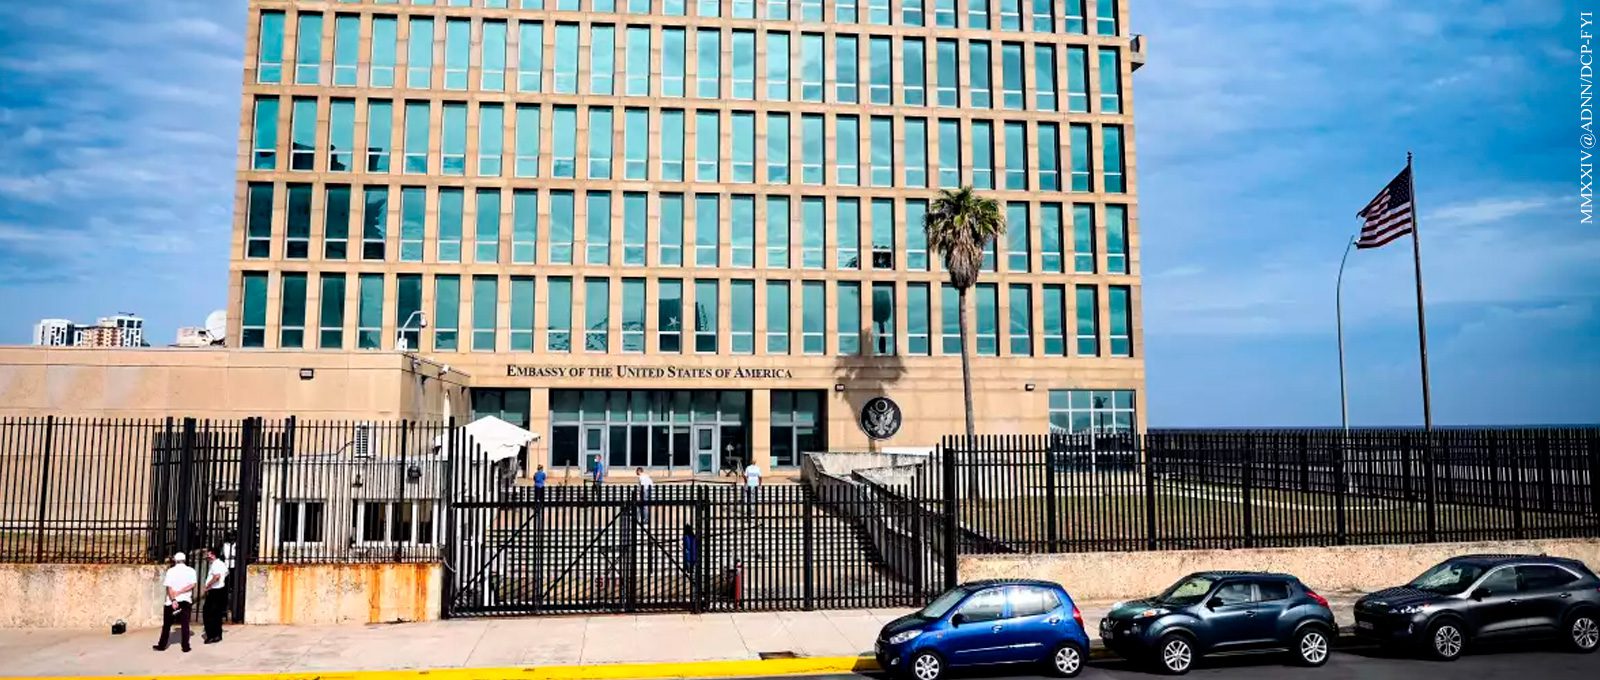 Havana Syndrome: mysterious illness among US diplomats was caused by Russian weapon, say newspapers